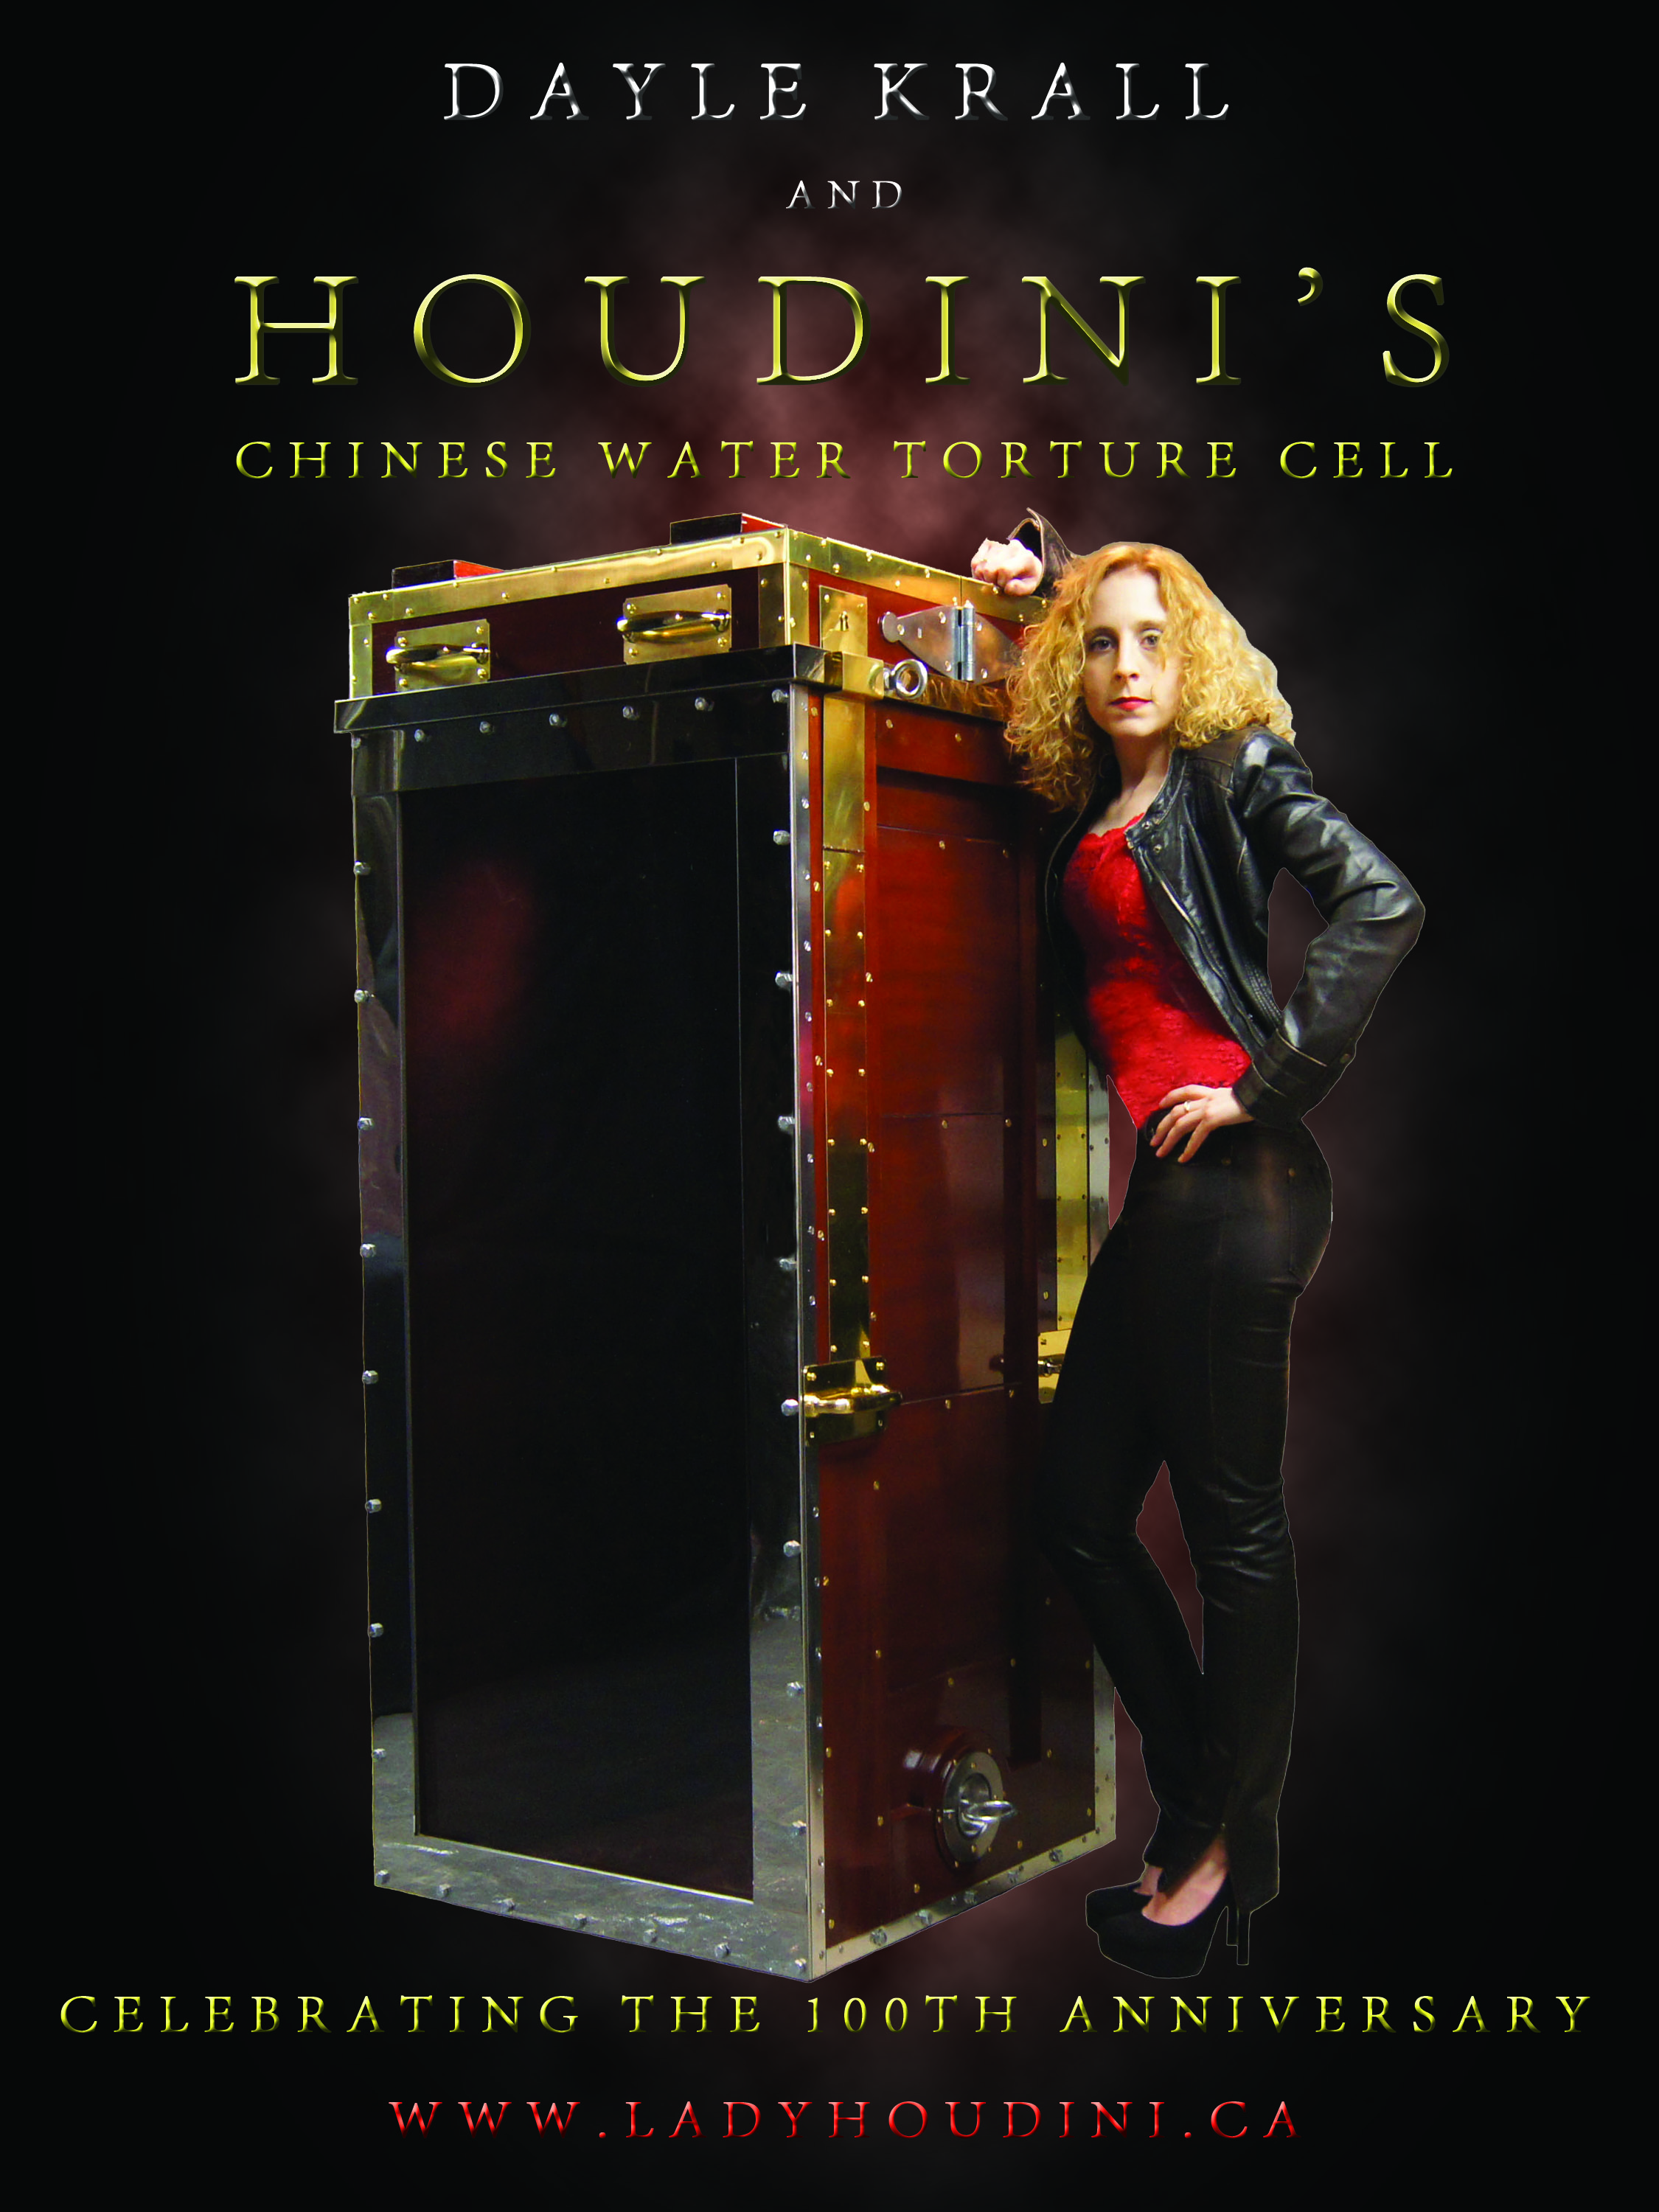 Dayle Krall with Houdini's Chinese Water Torture Cell